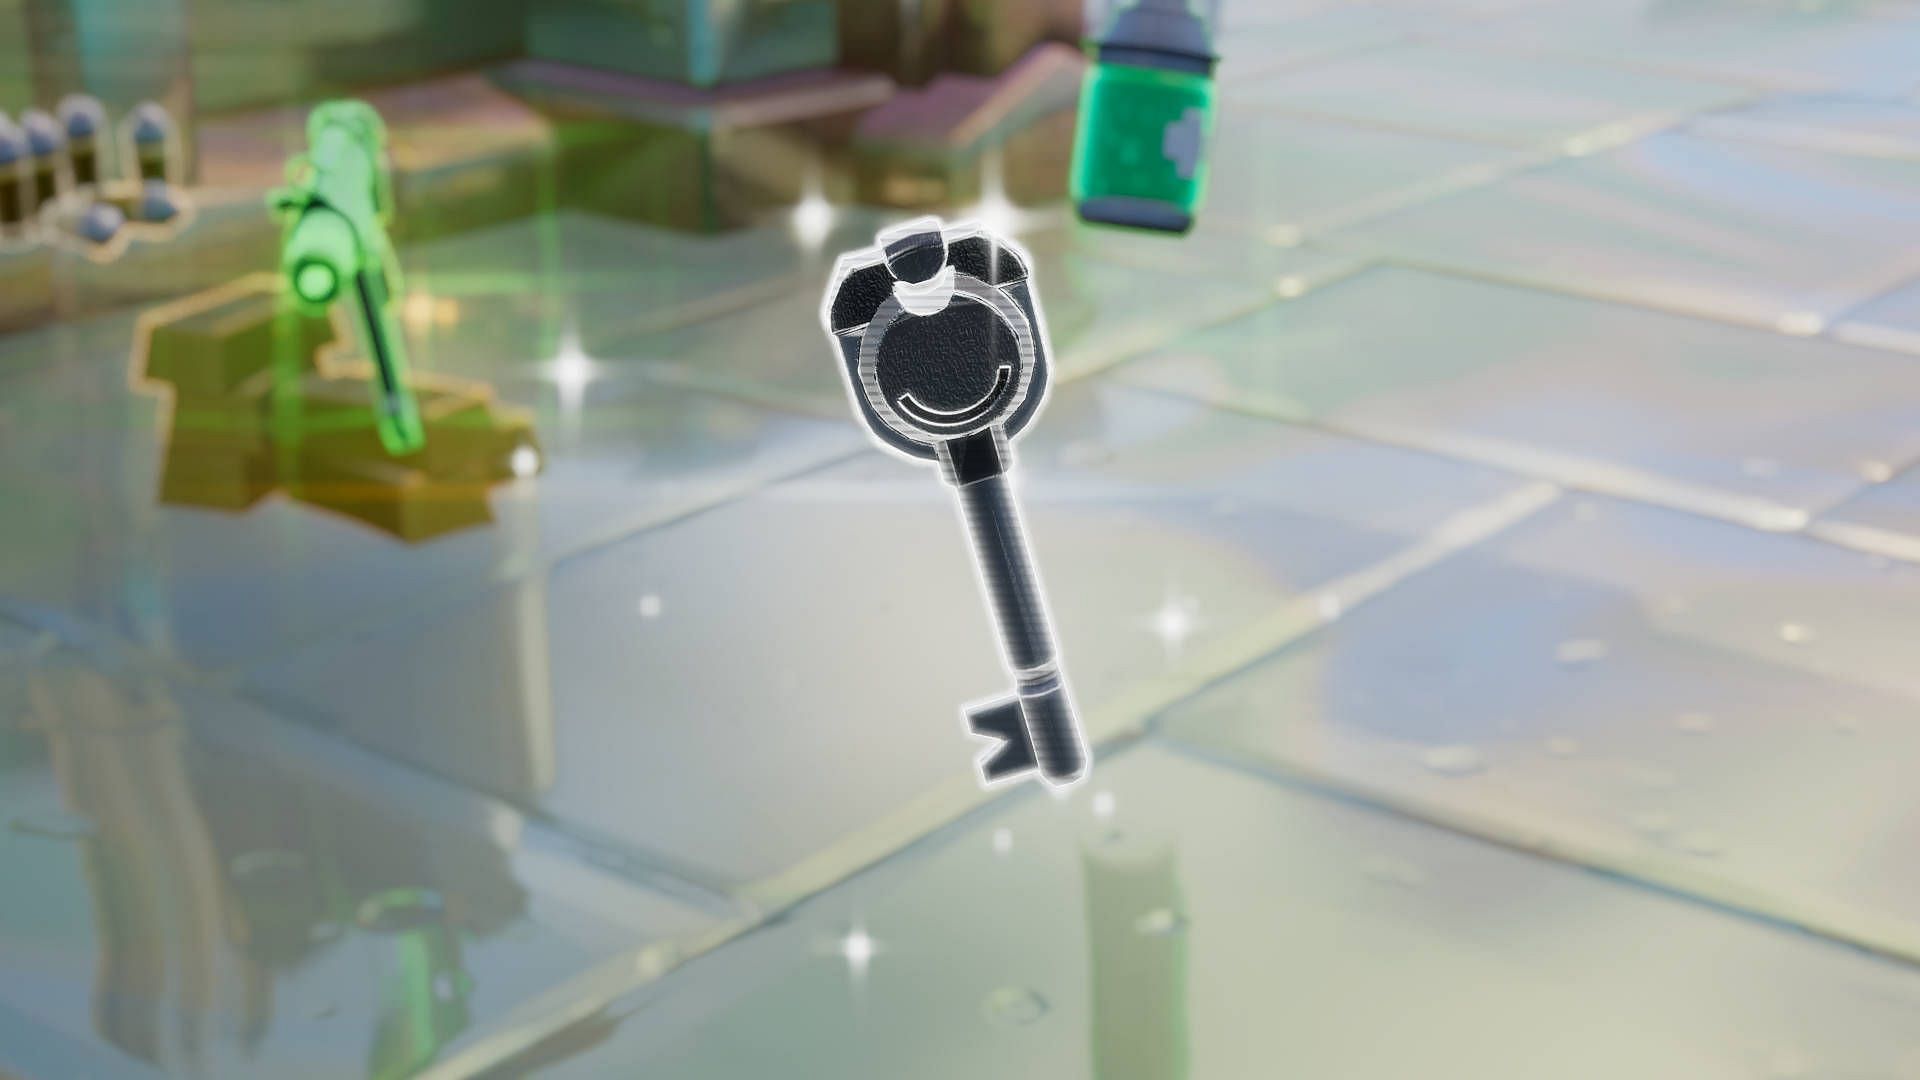 To open vaults, Fortnite players first have to find a key (Image via Epic Games)